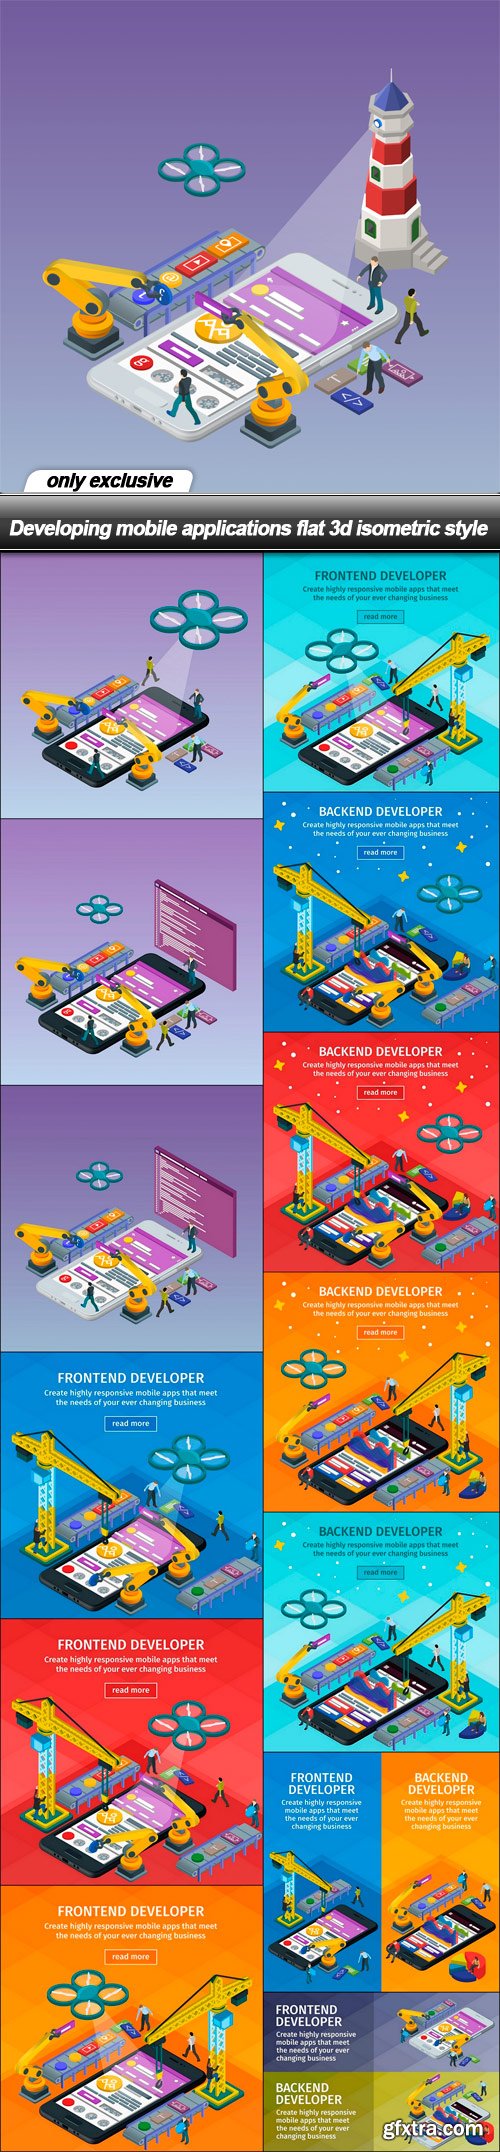 Developing mobile applications flat 3d isometric style - 14 EPS